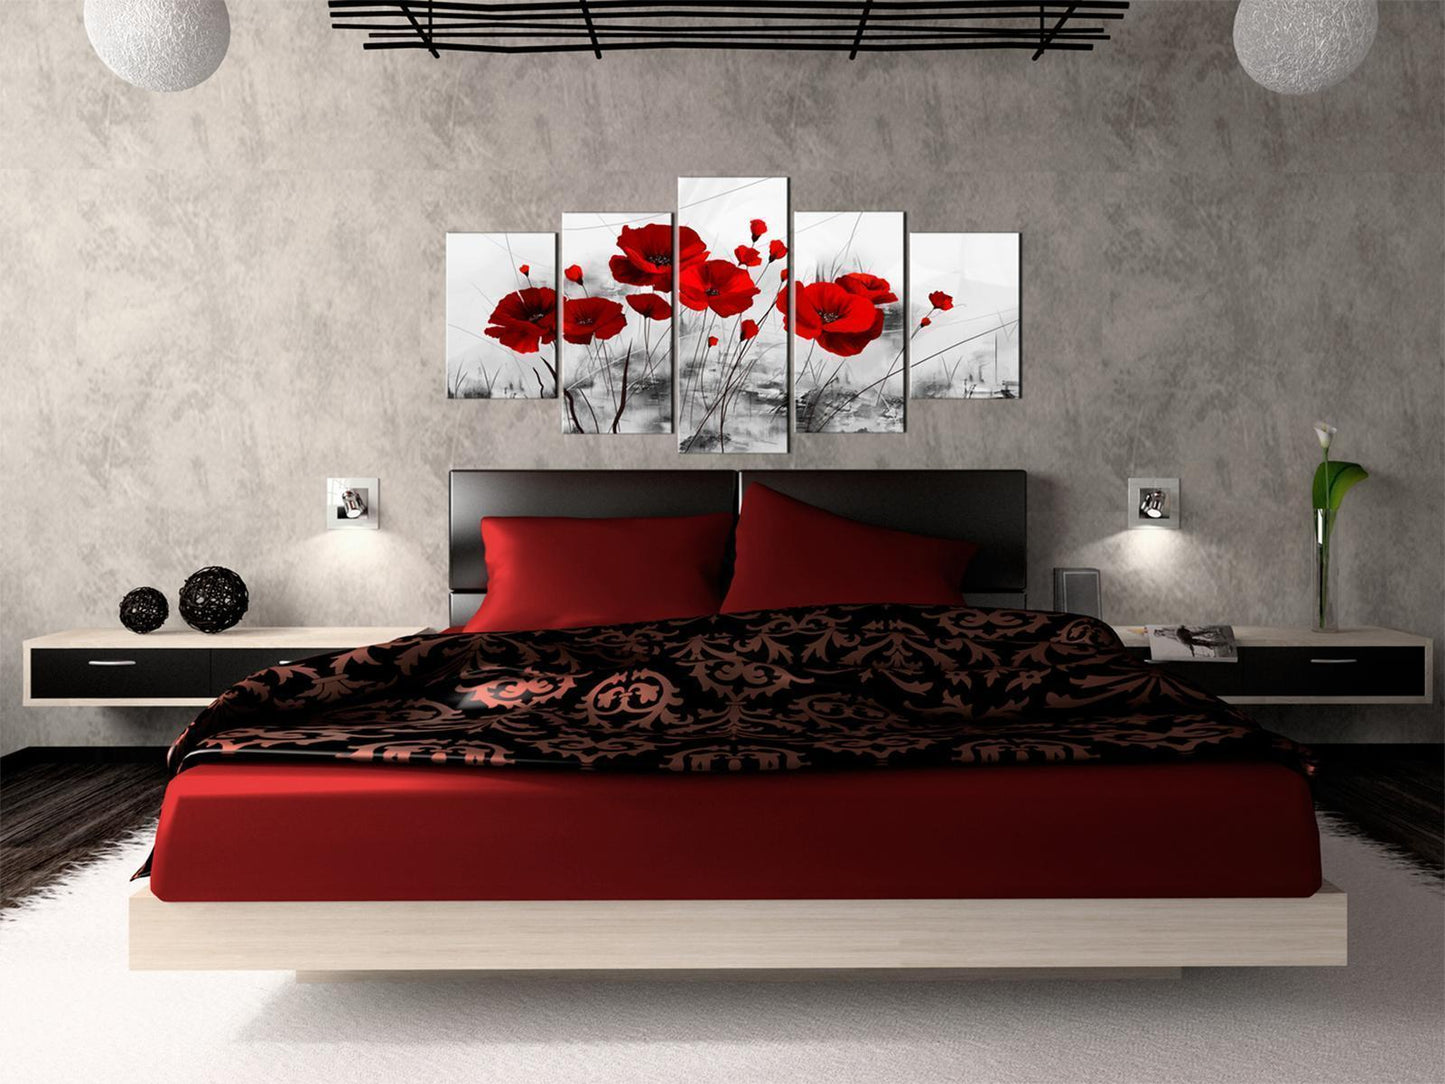 Painting - poppies - red miracle